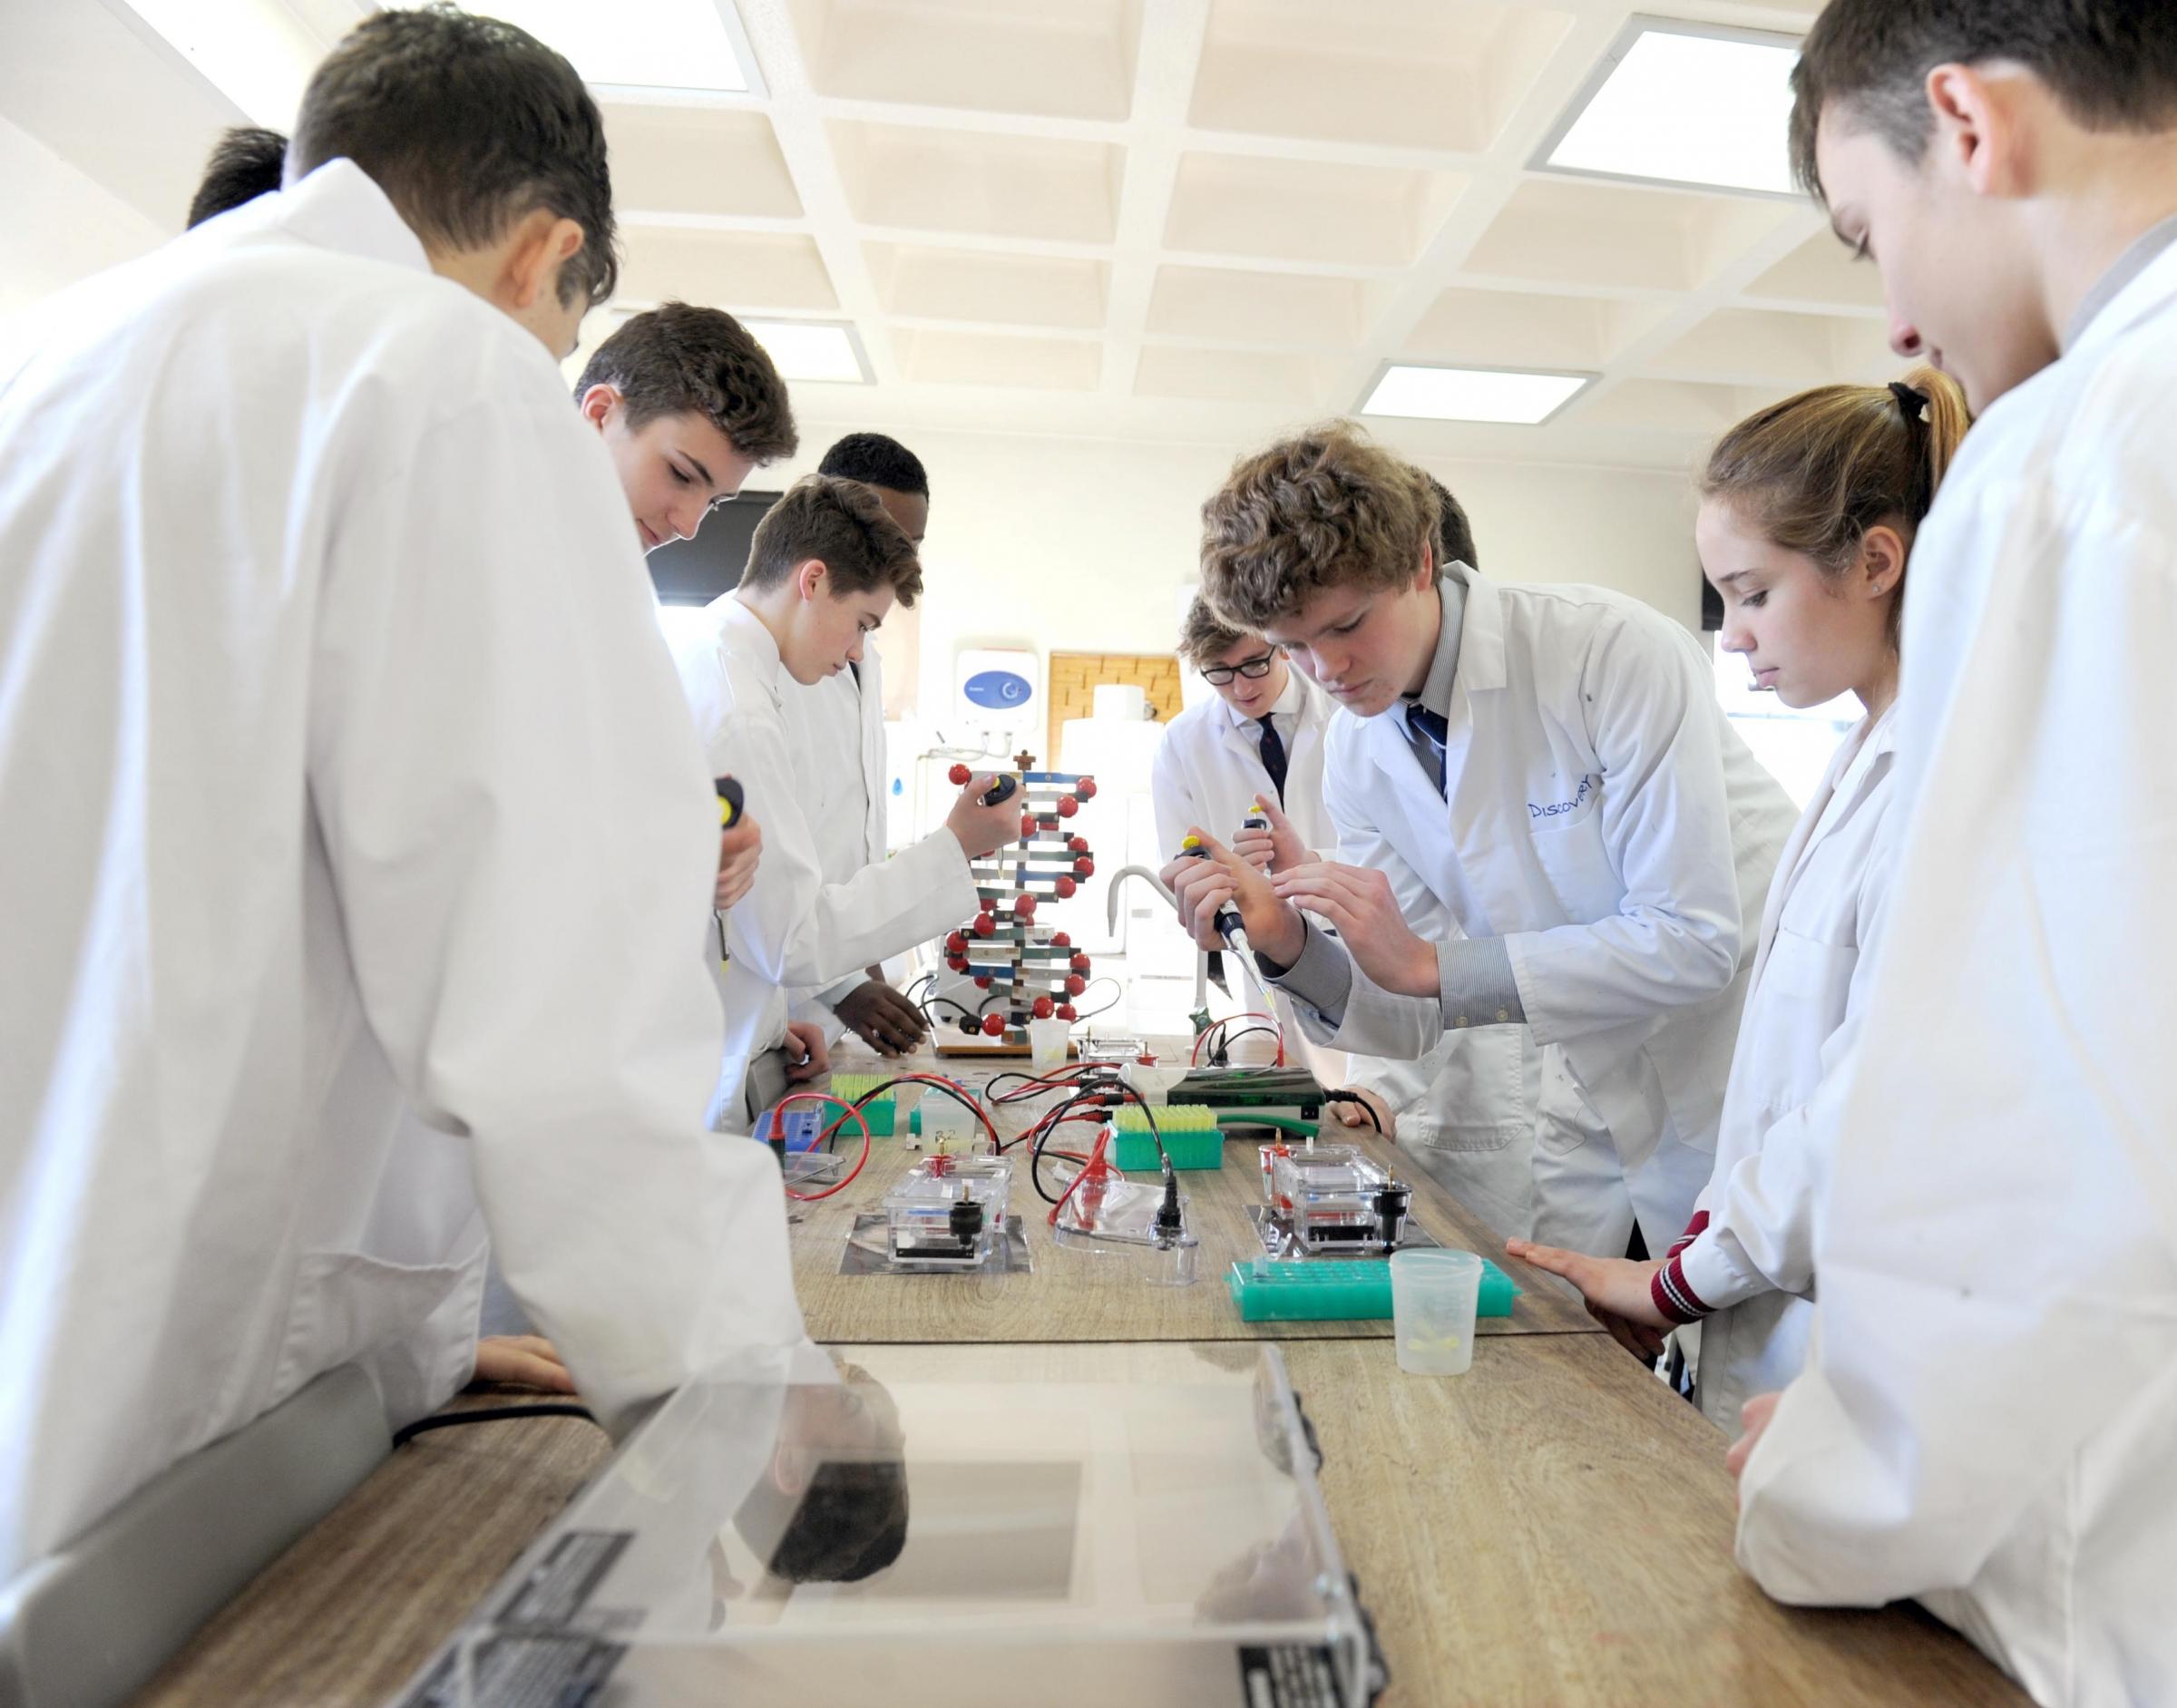 Damning report leads to call for school science shake-up